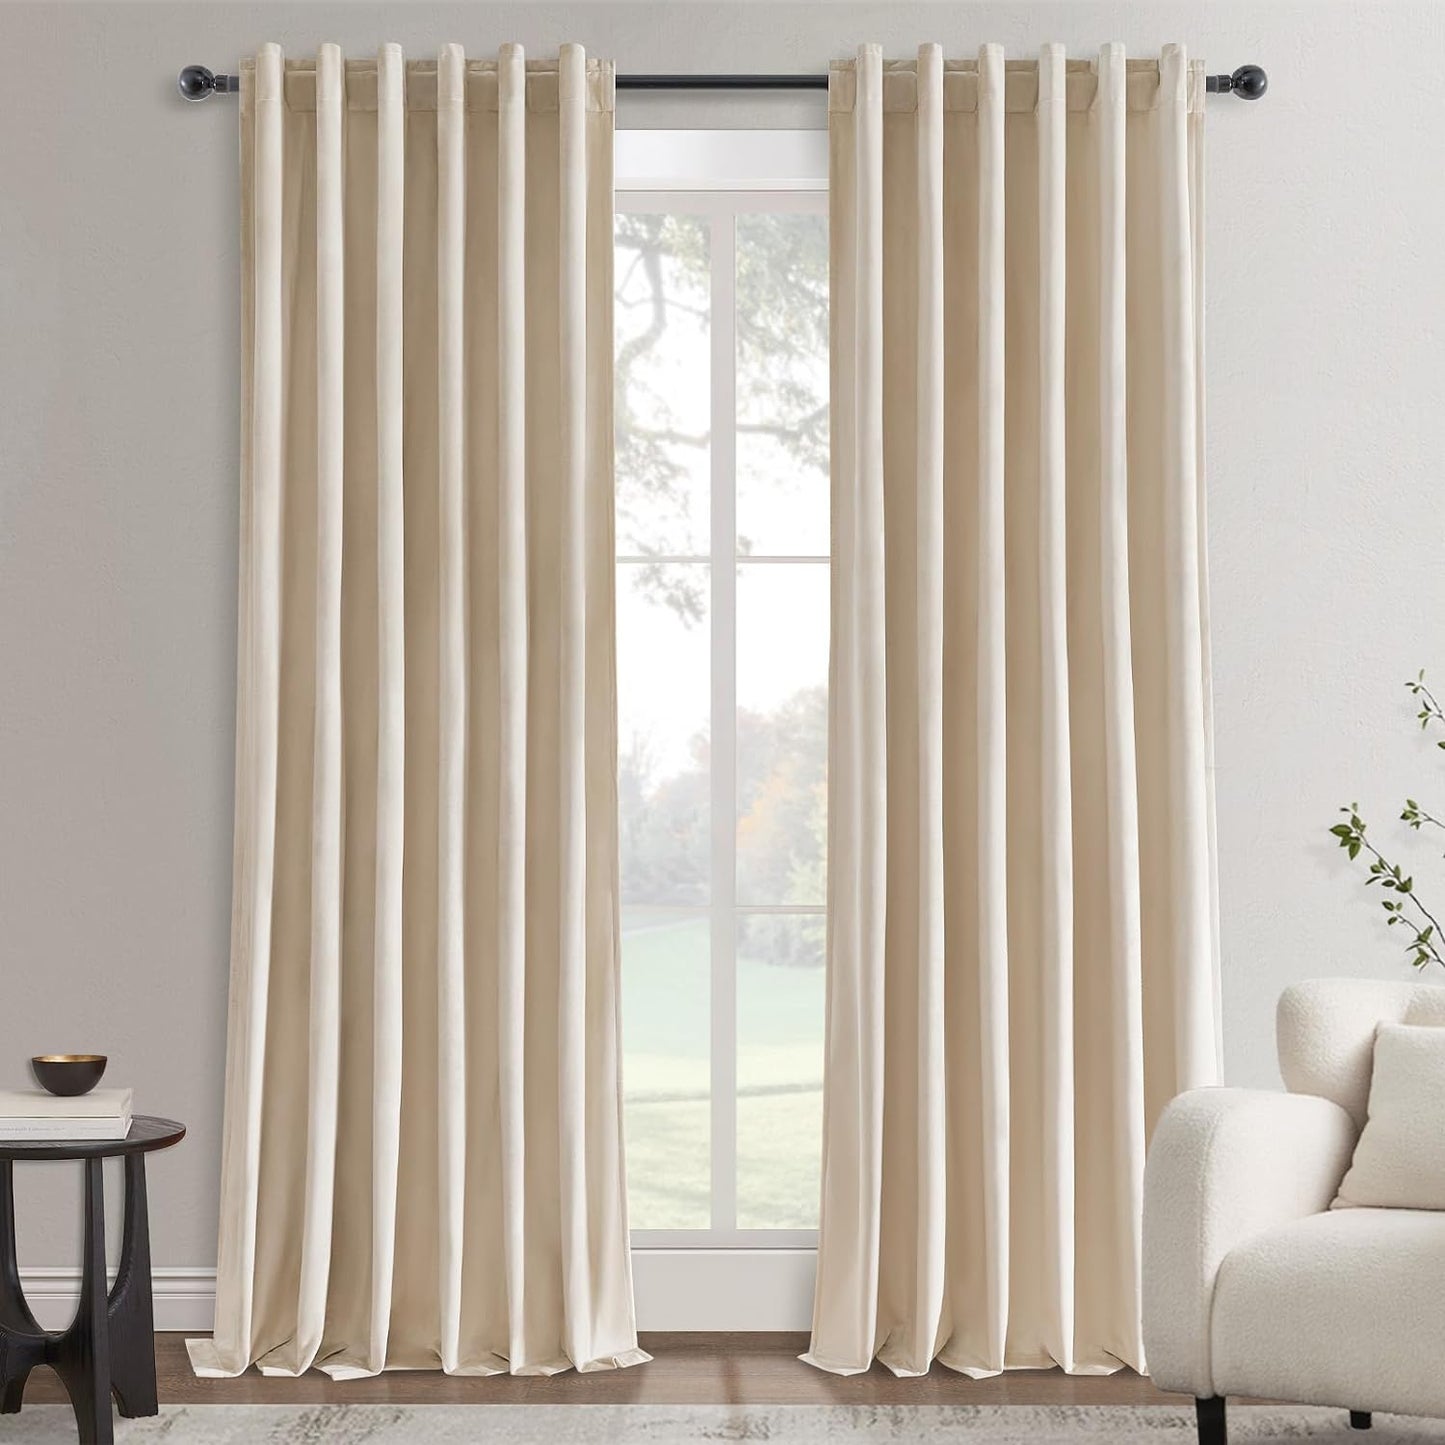 Topfinel Olive Green Velvet Curtains 84 Inches Long for Living Room,Blackout Thermal Insulated Curtains for Bedroom,Back Tab Modern Window Treatment for Living Room,52X84 Inch Length,Olive Green  Top Fine Beige 52" X 102" 